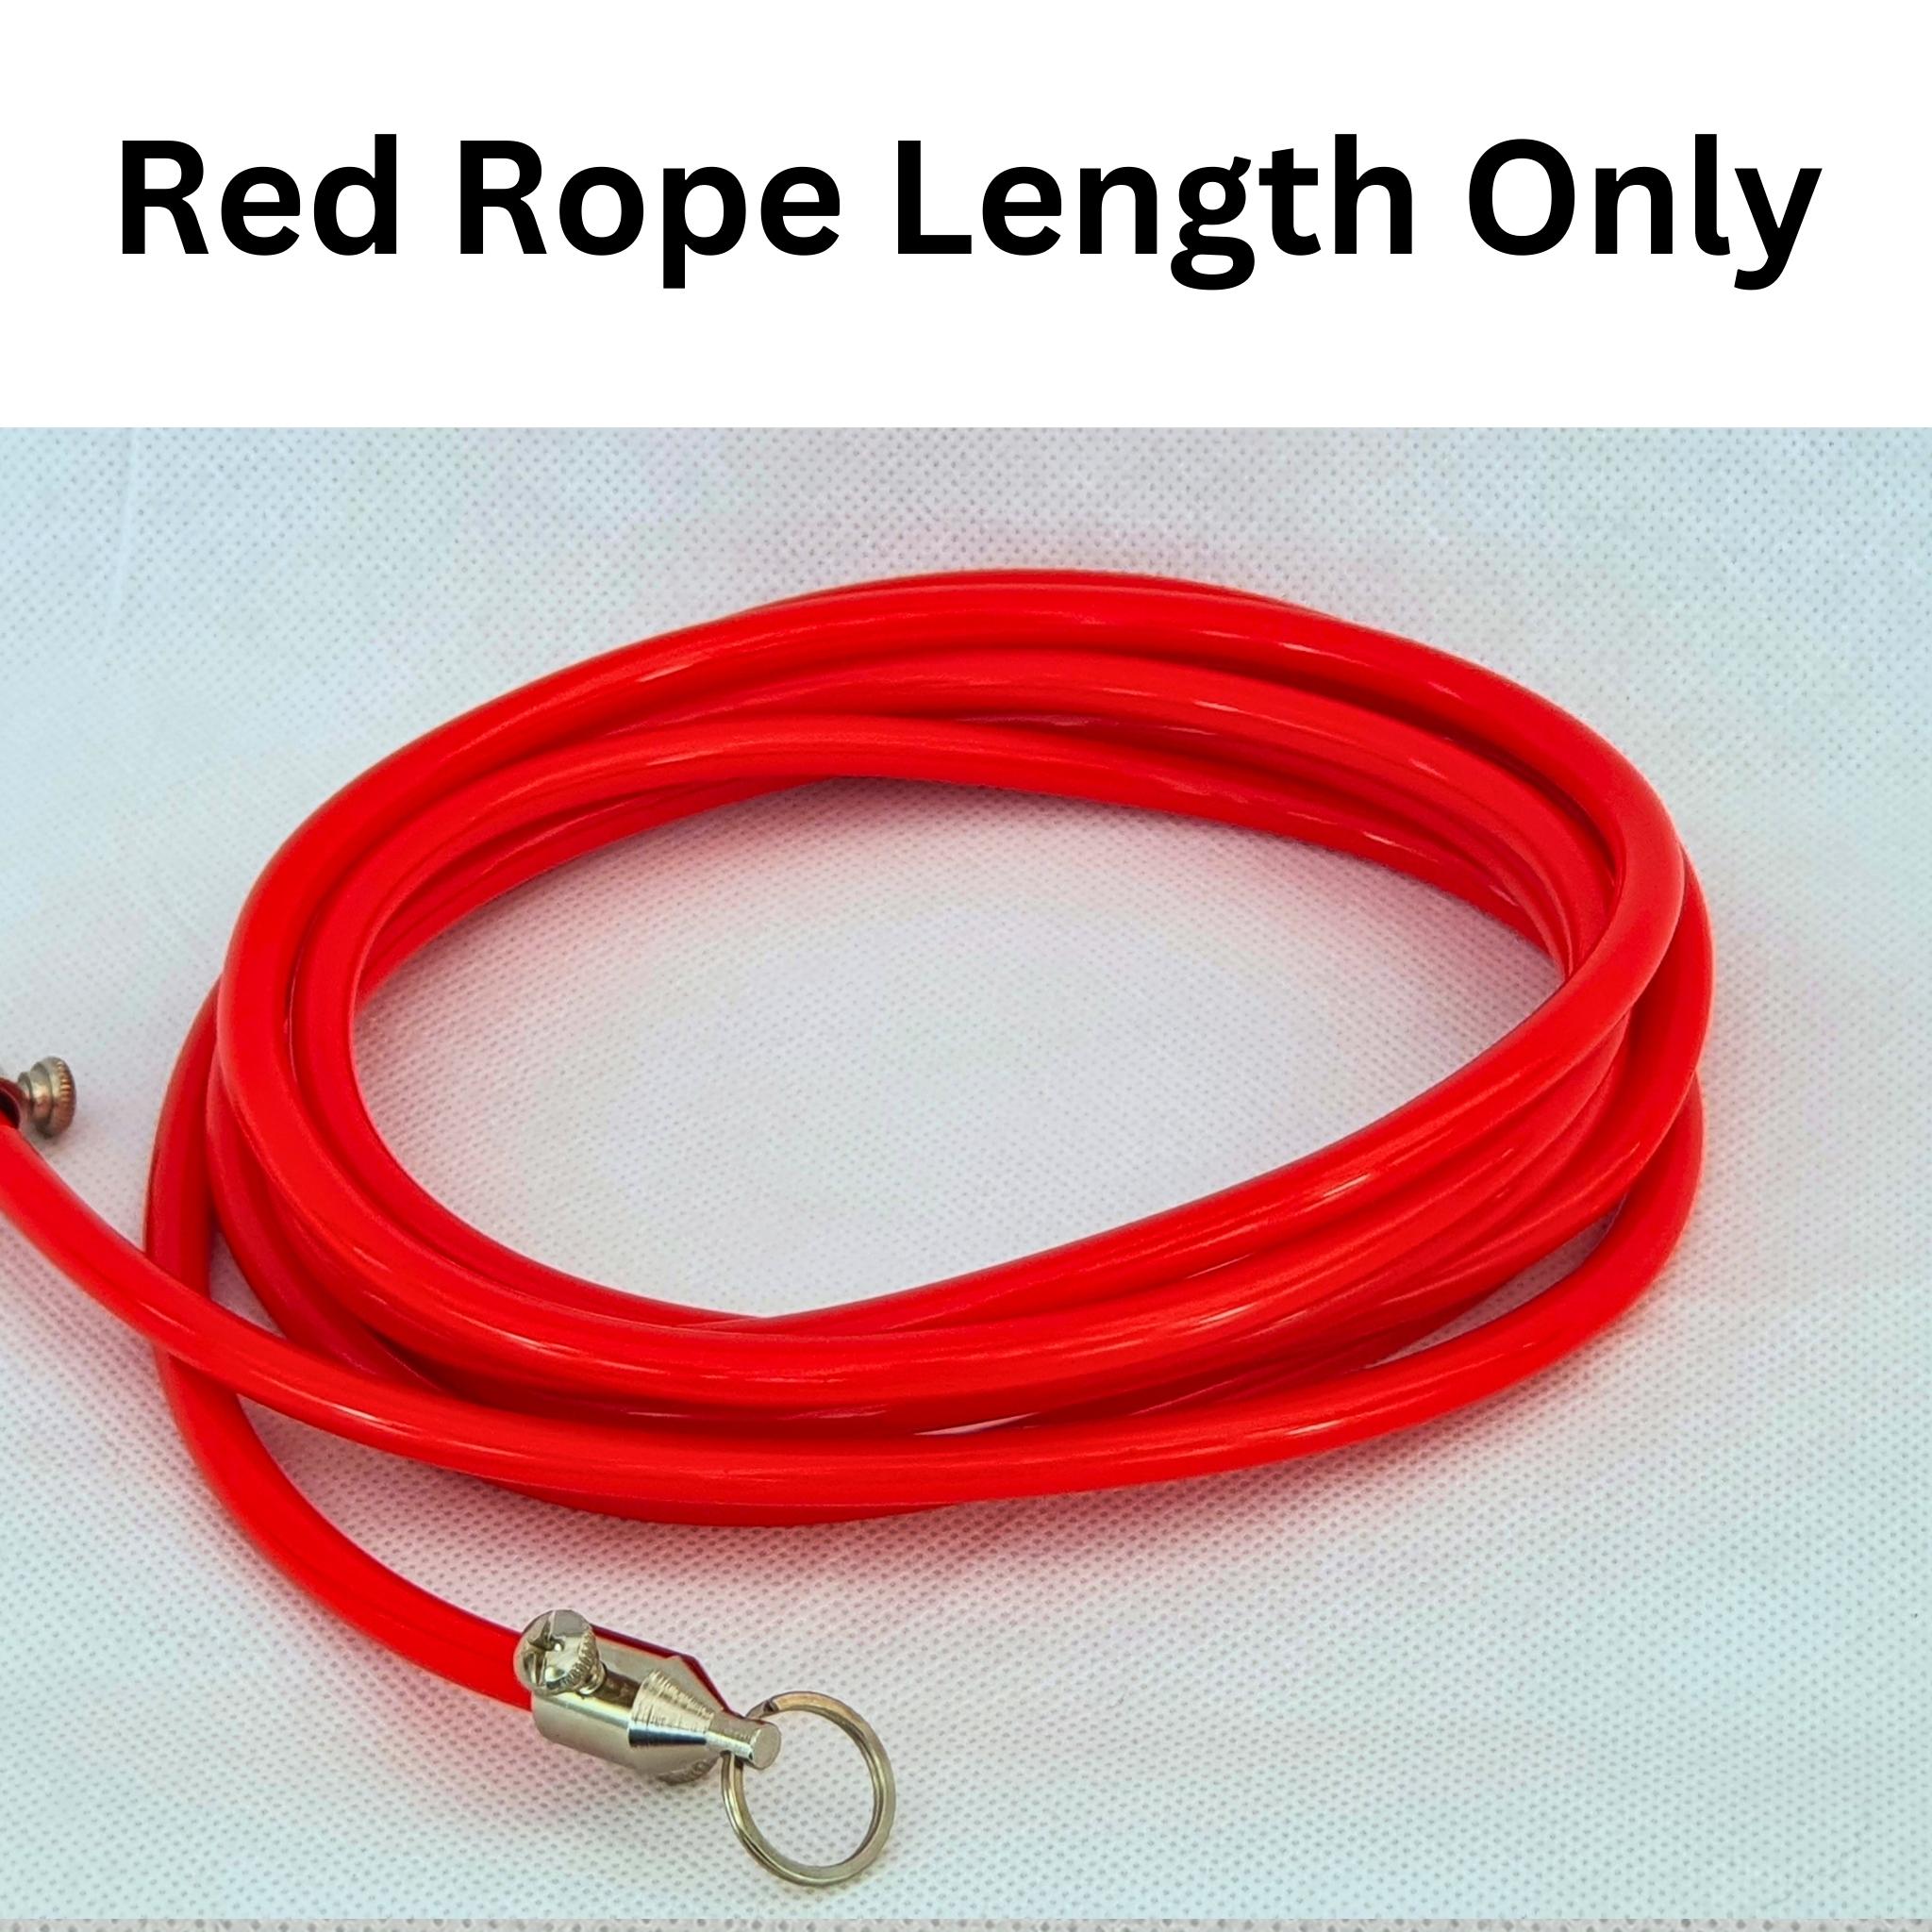 Red PVC Skipping Rope Length 8mm